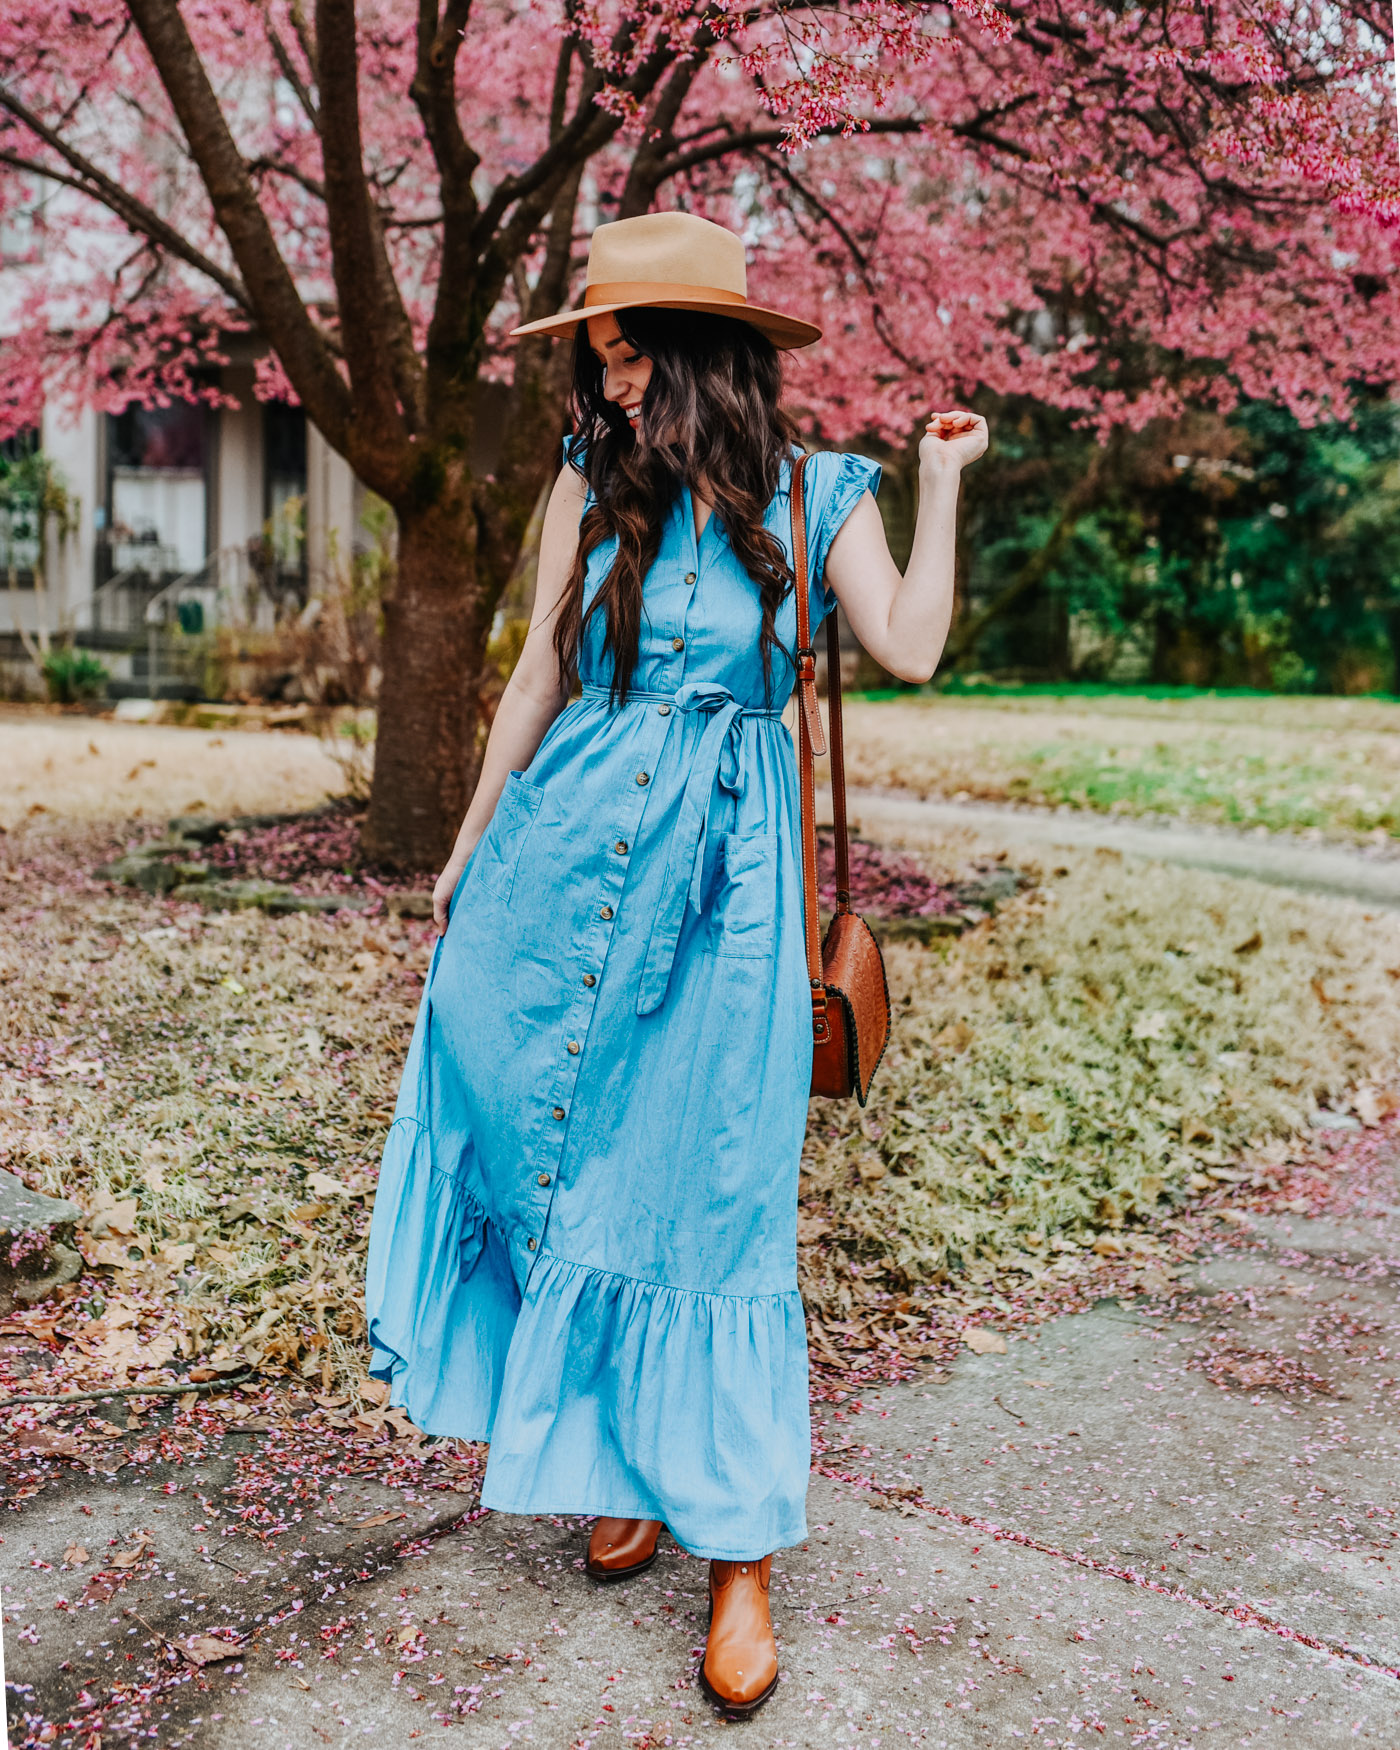 Maxi Dress and Cowboy Boots Look | Lone Star Looking Glass